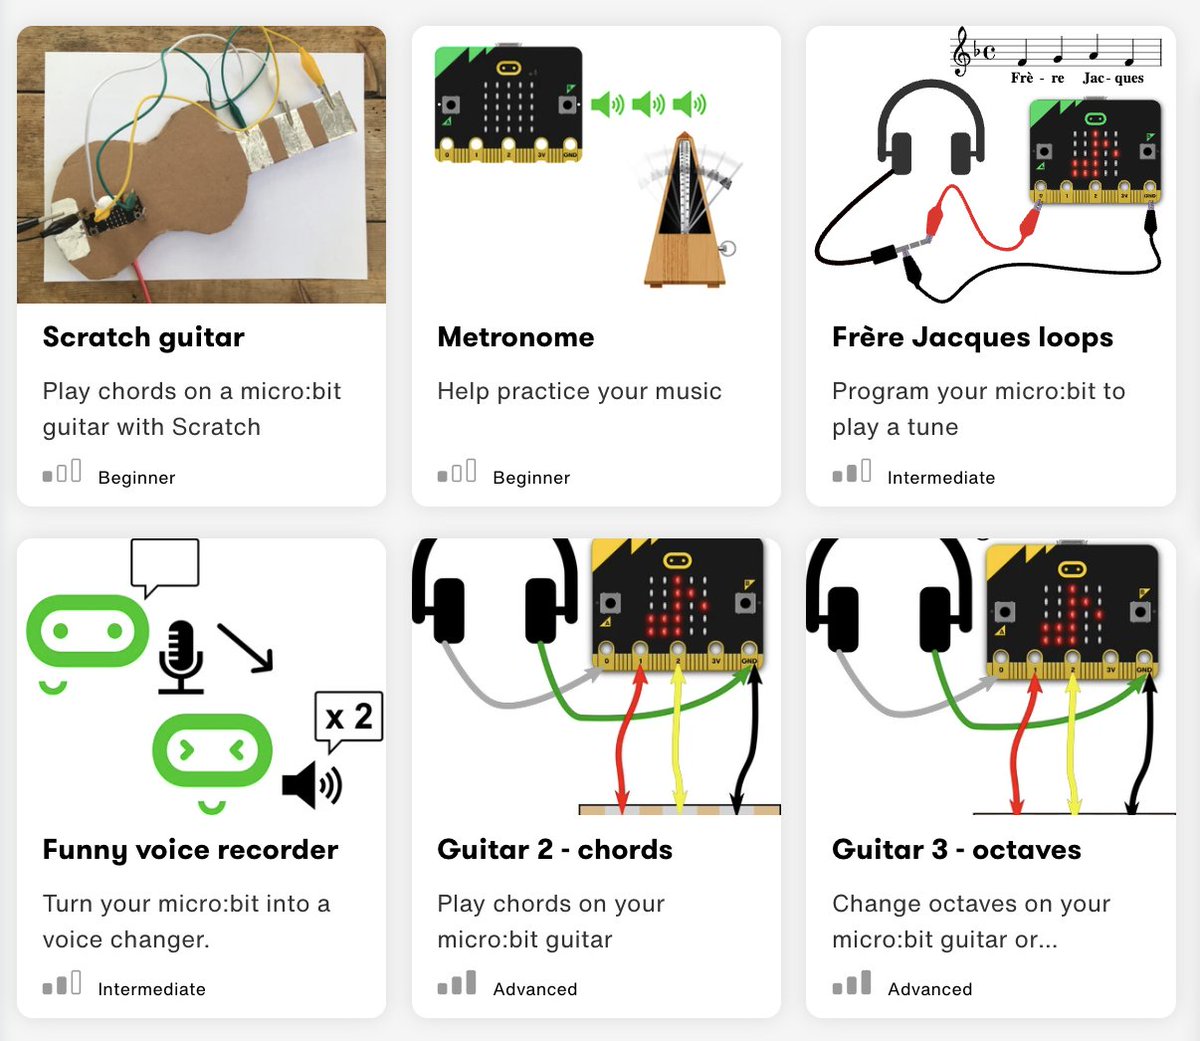 🎶PROJECT IDEA💡 Combine your love of music🎵 and programming 💻with these fun micro:bit projects which not only help computational thinking but sound good too! Take it one step further & code your own favourite tunes🎶! microbit.org/projects/make-… #microbit #coding #STEAM